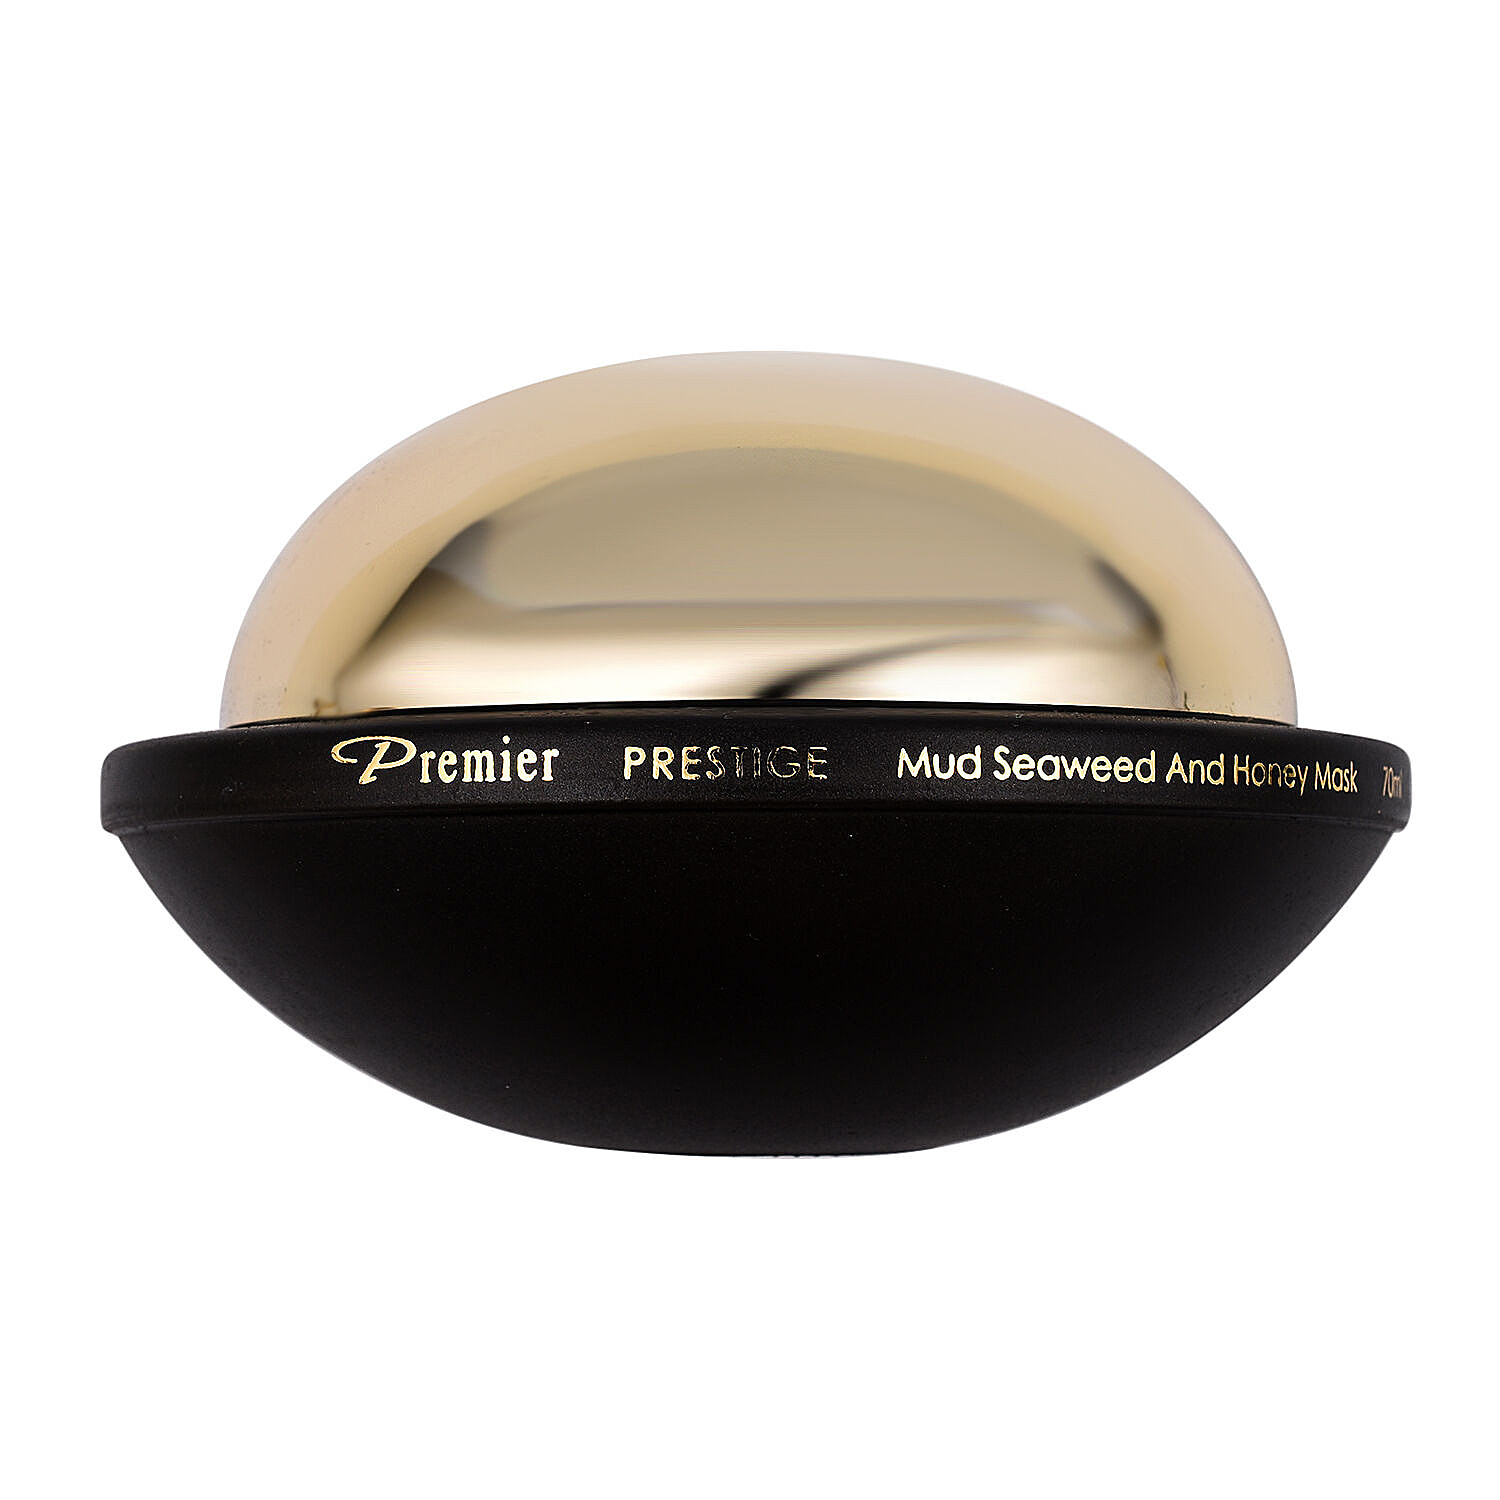 Premier Age Smart: Mud, Seaweed and Honey Mask - Normal to Oily Skin 70ml